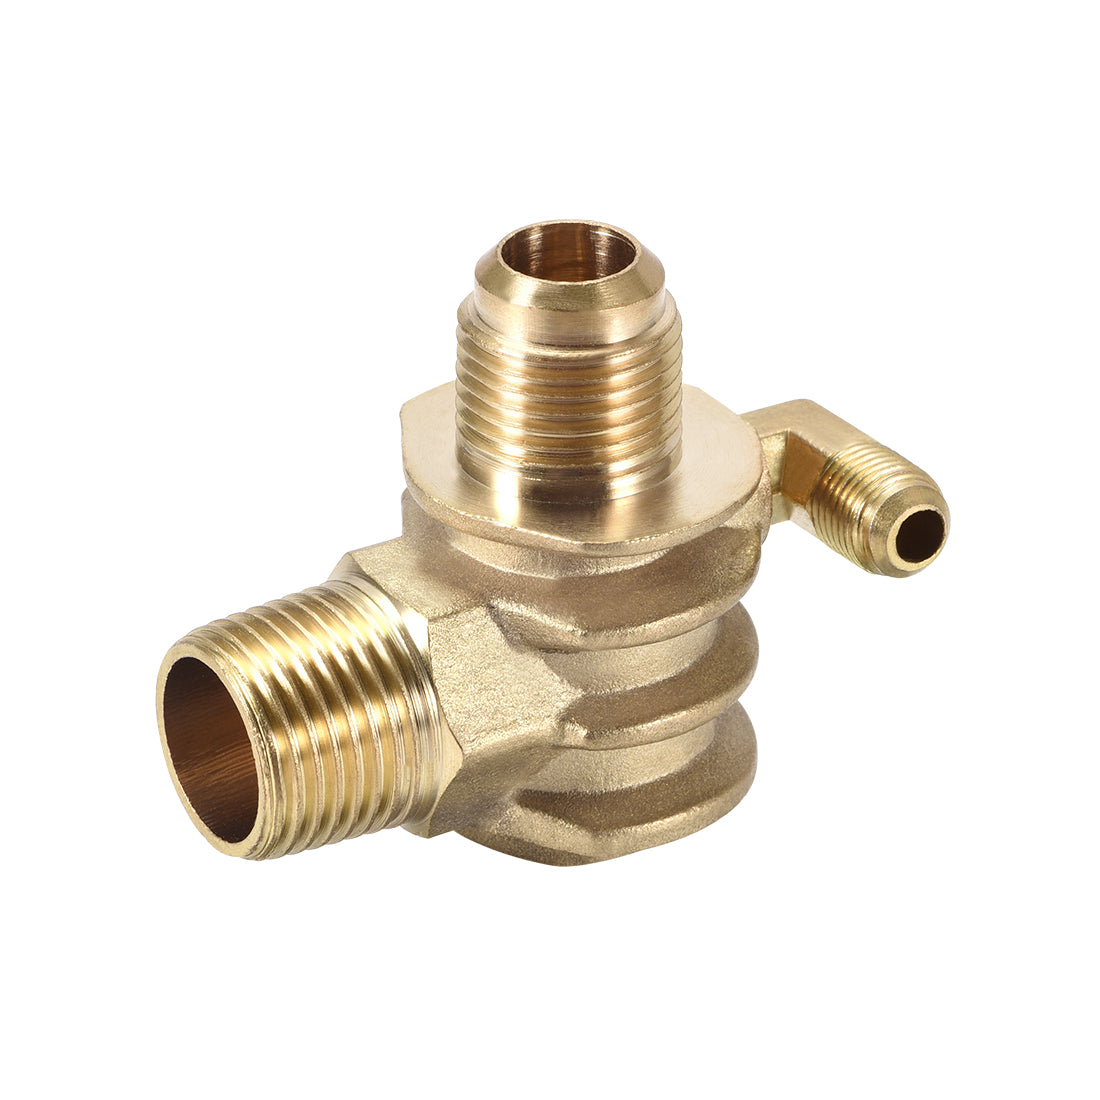 uxcell Uxcell Air Compressor Check Valve 90 Degree Right Male Threaded Removable Brass G1/2" x 19mm x G1/8" 2Pcs